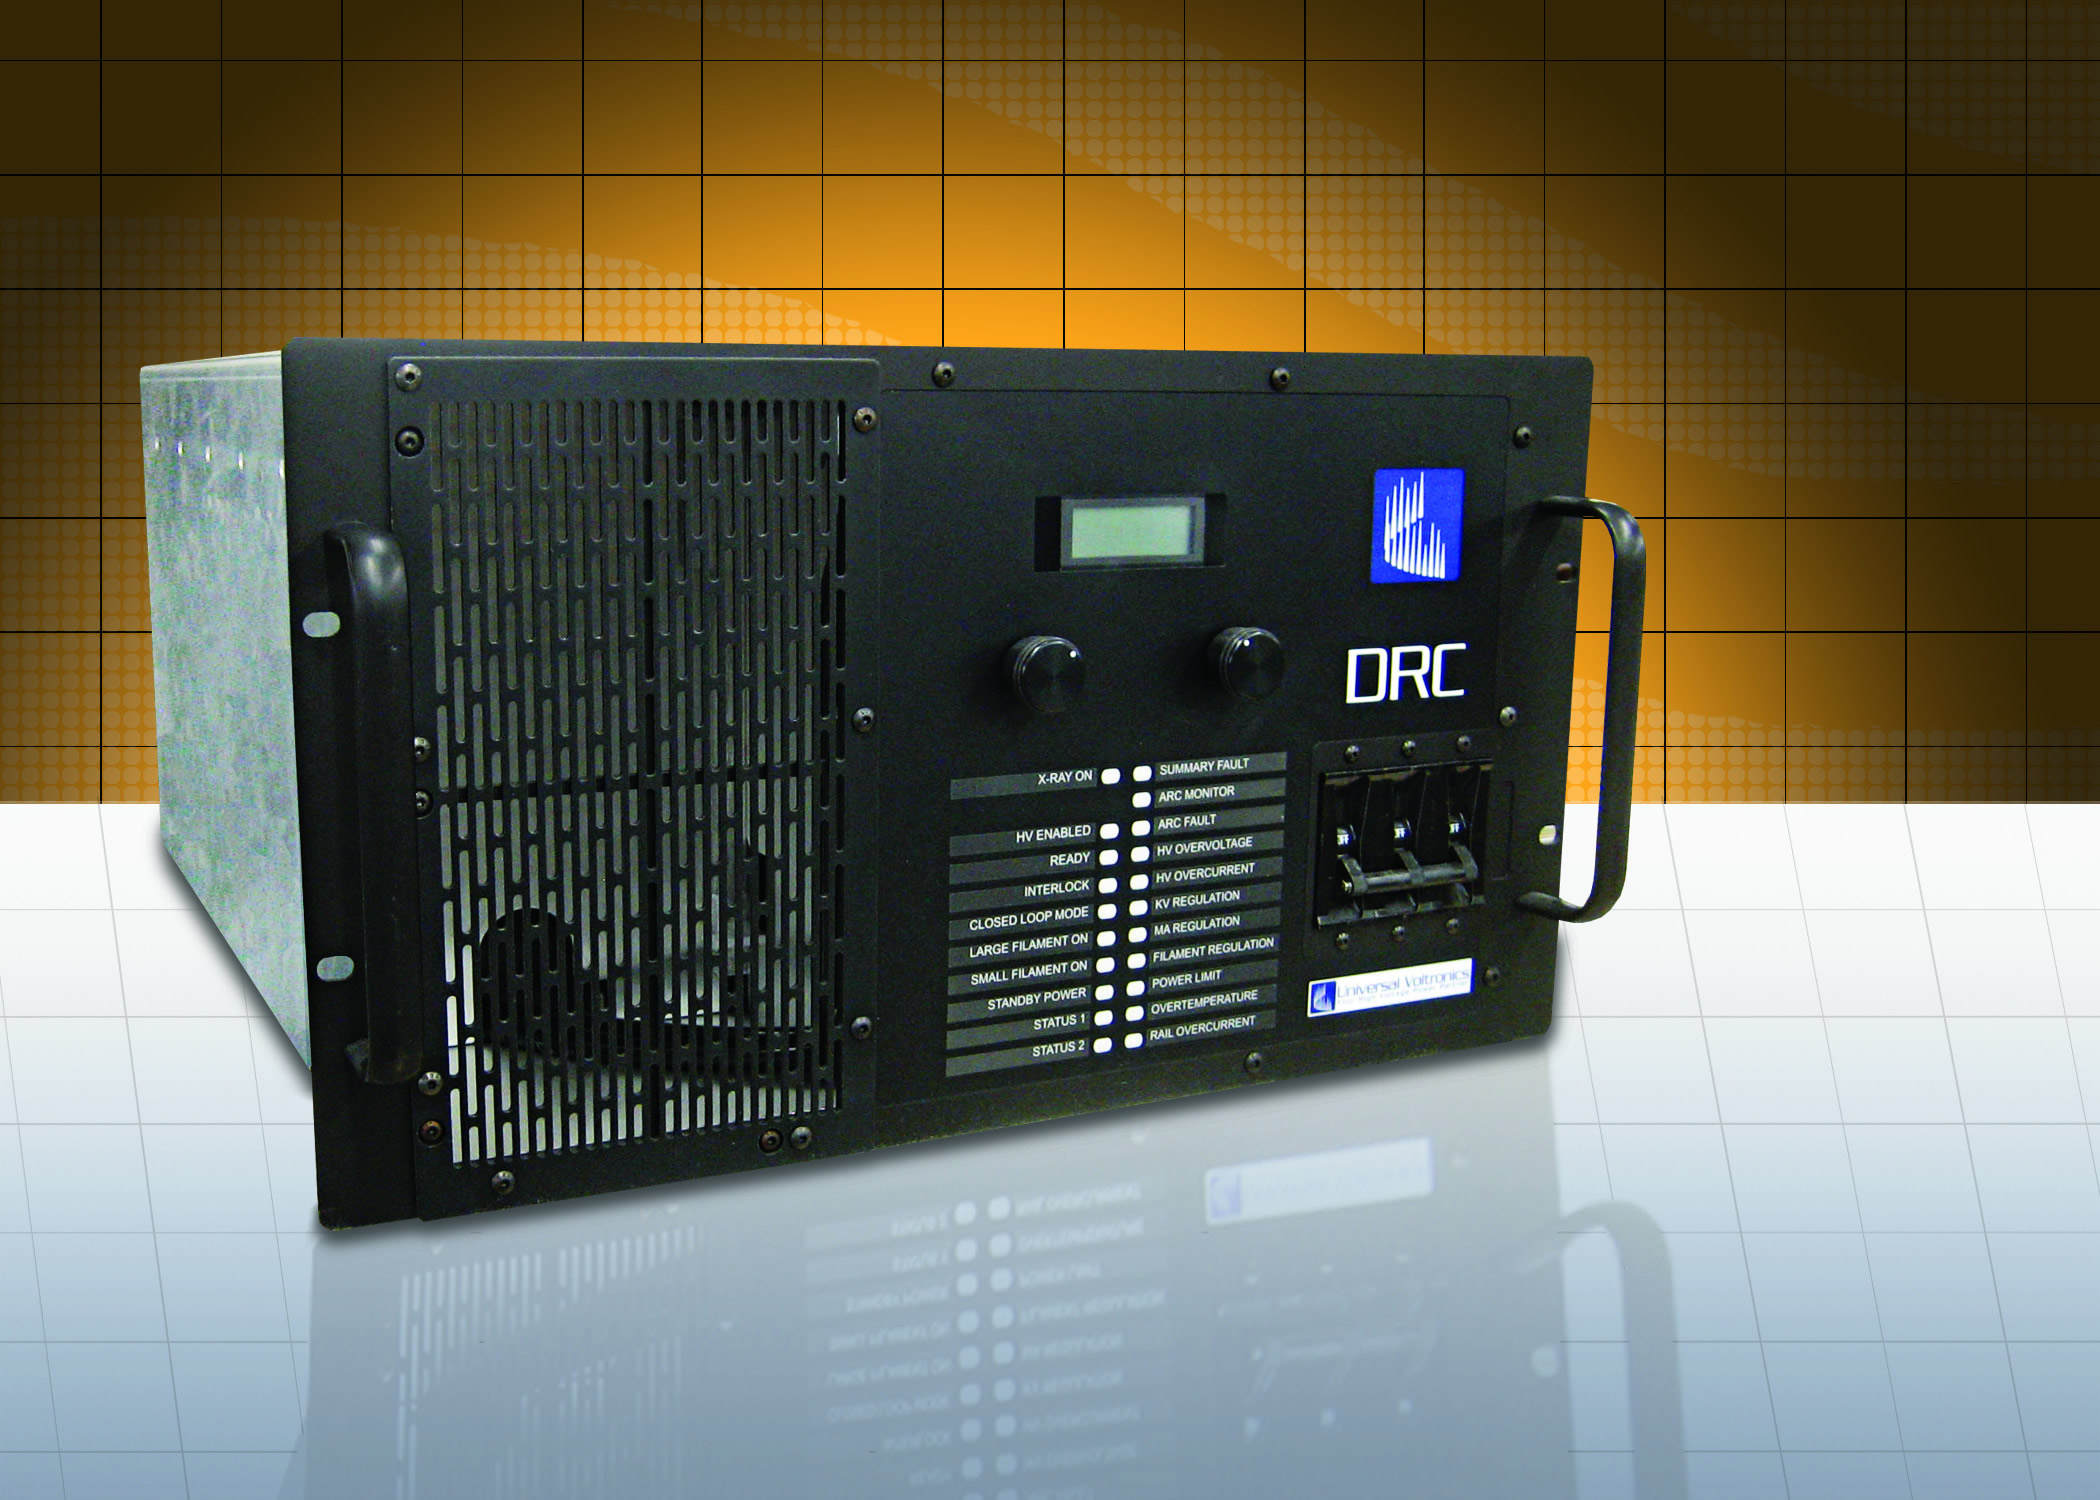 High voltage dc power supply delivers low ripple, fast transient